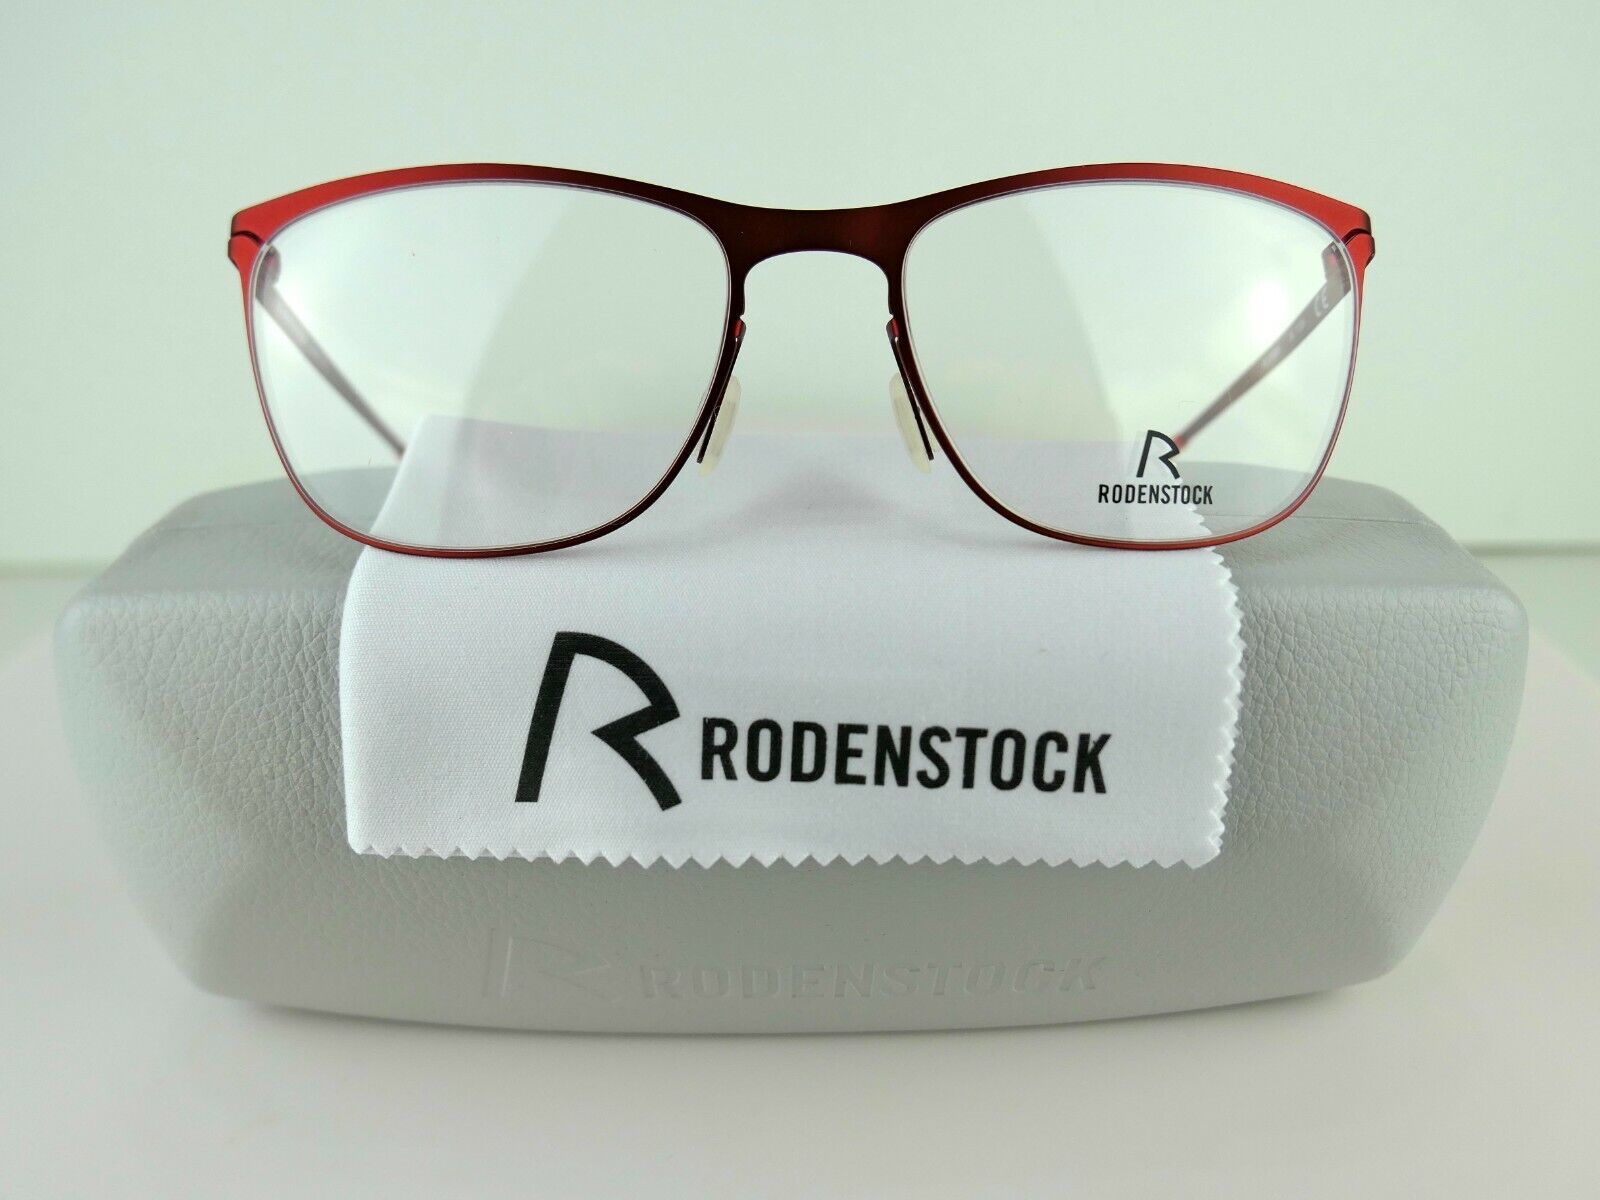 Primary image for Rodenstock R 2591 A (Red) 52-17-135 Eyeglass Frames